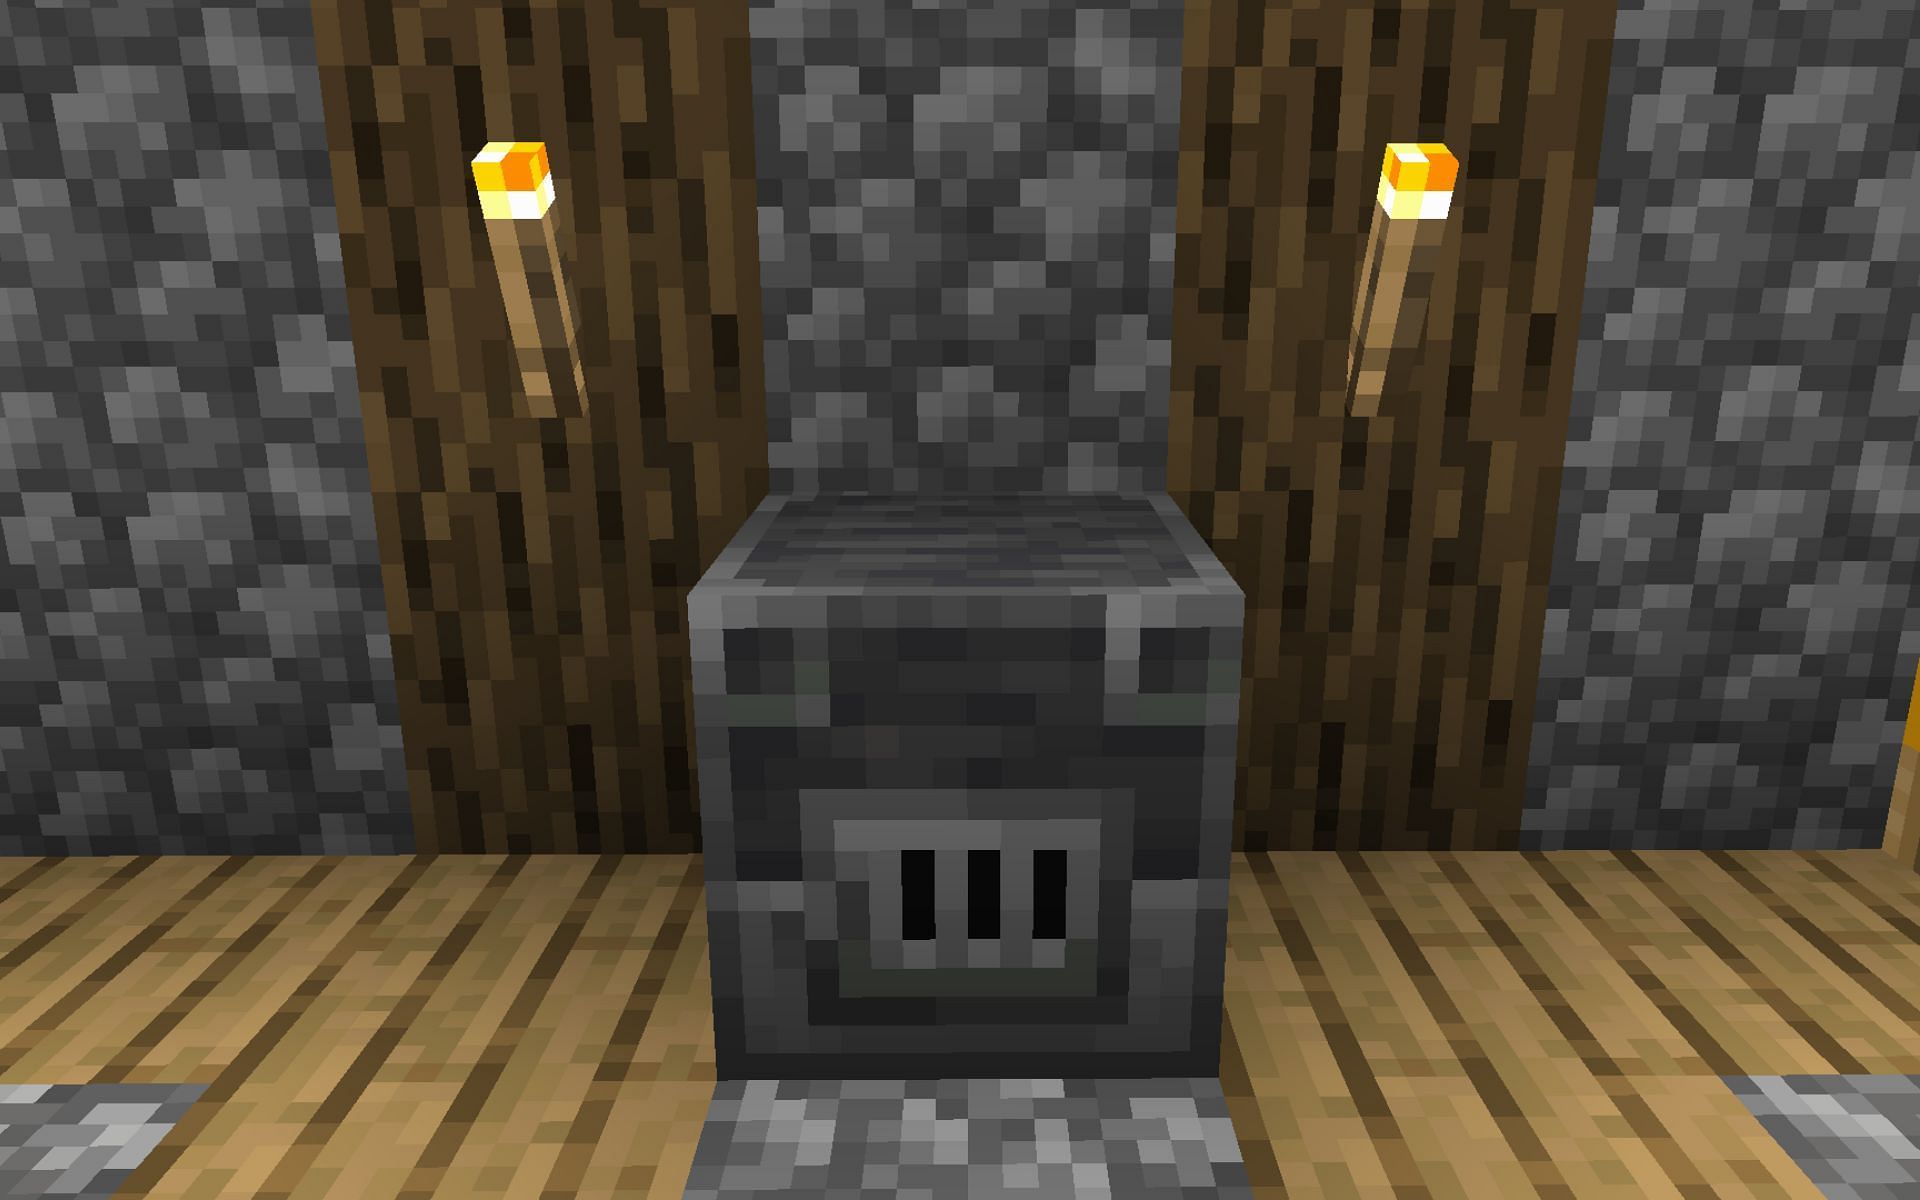 Blast furnace can only be used to smelt raw earth materials (Image via Minecraft 1.19 update)